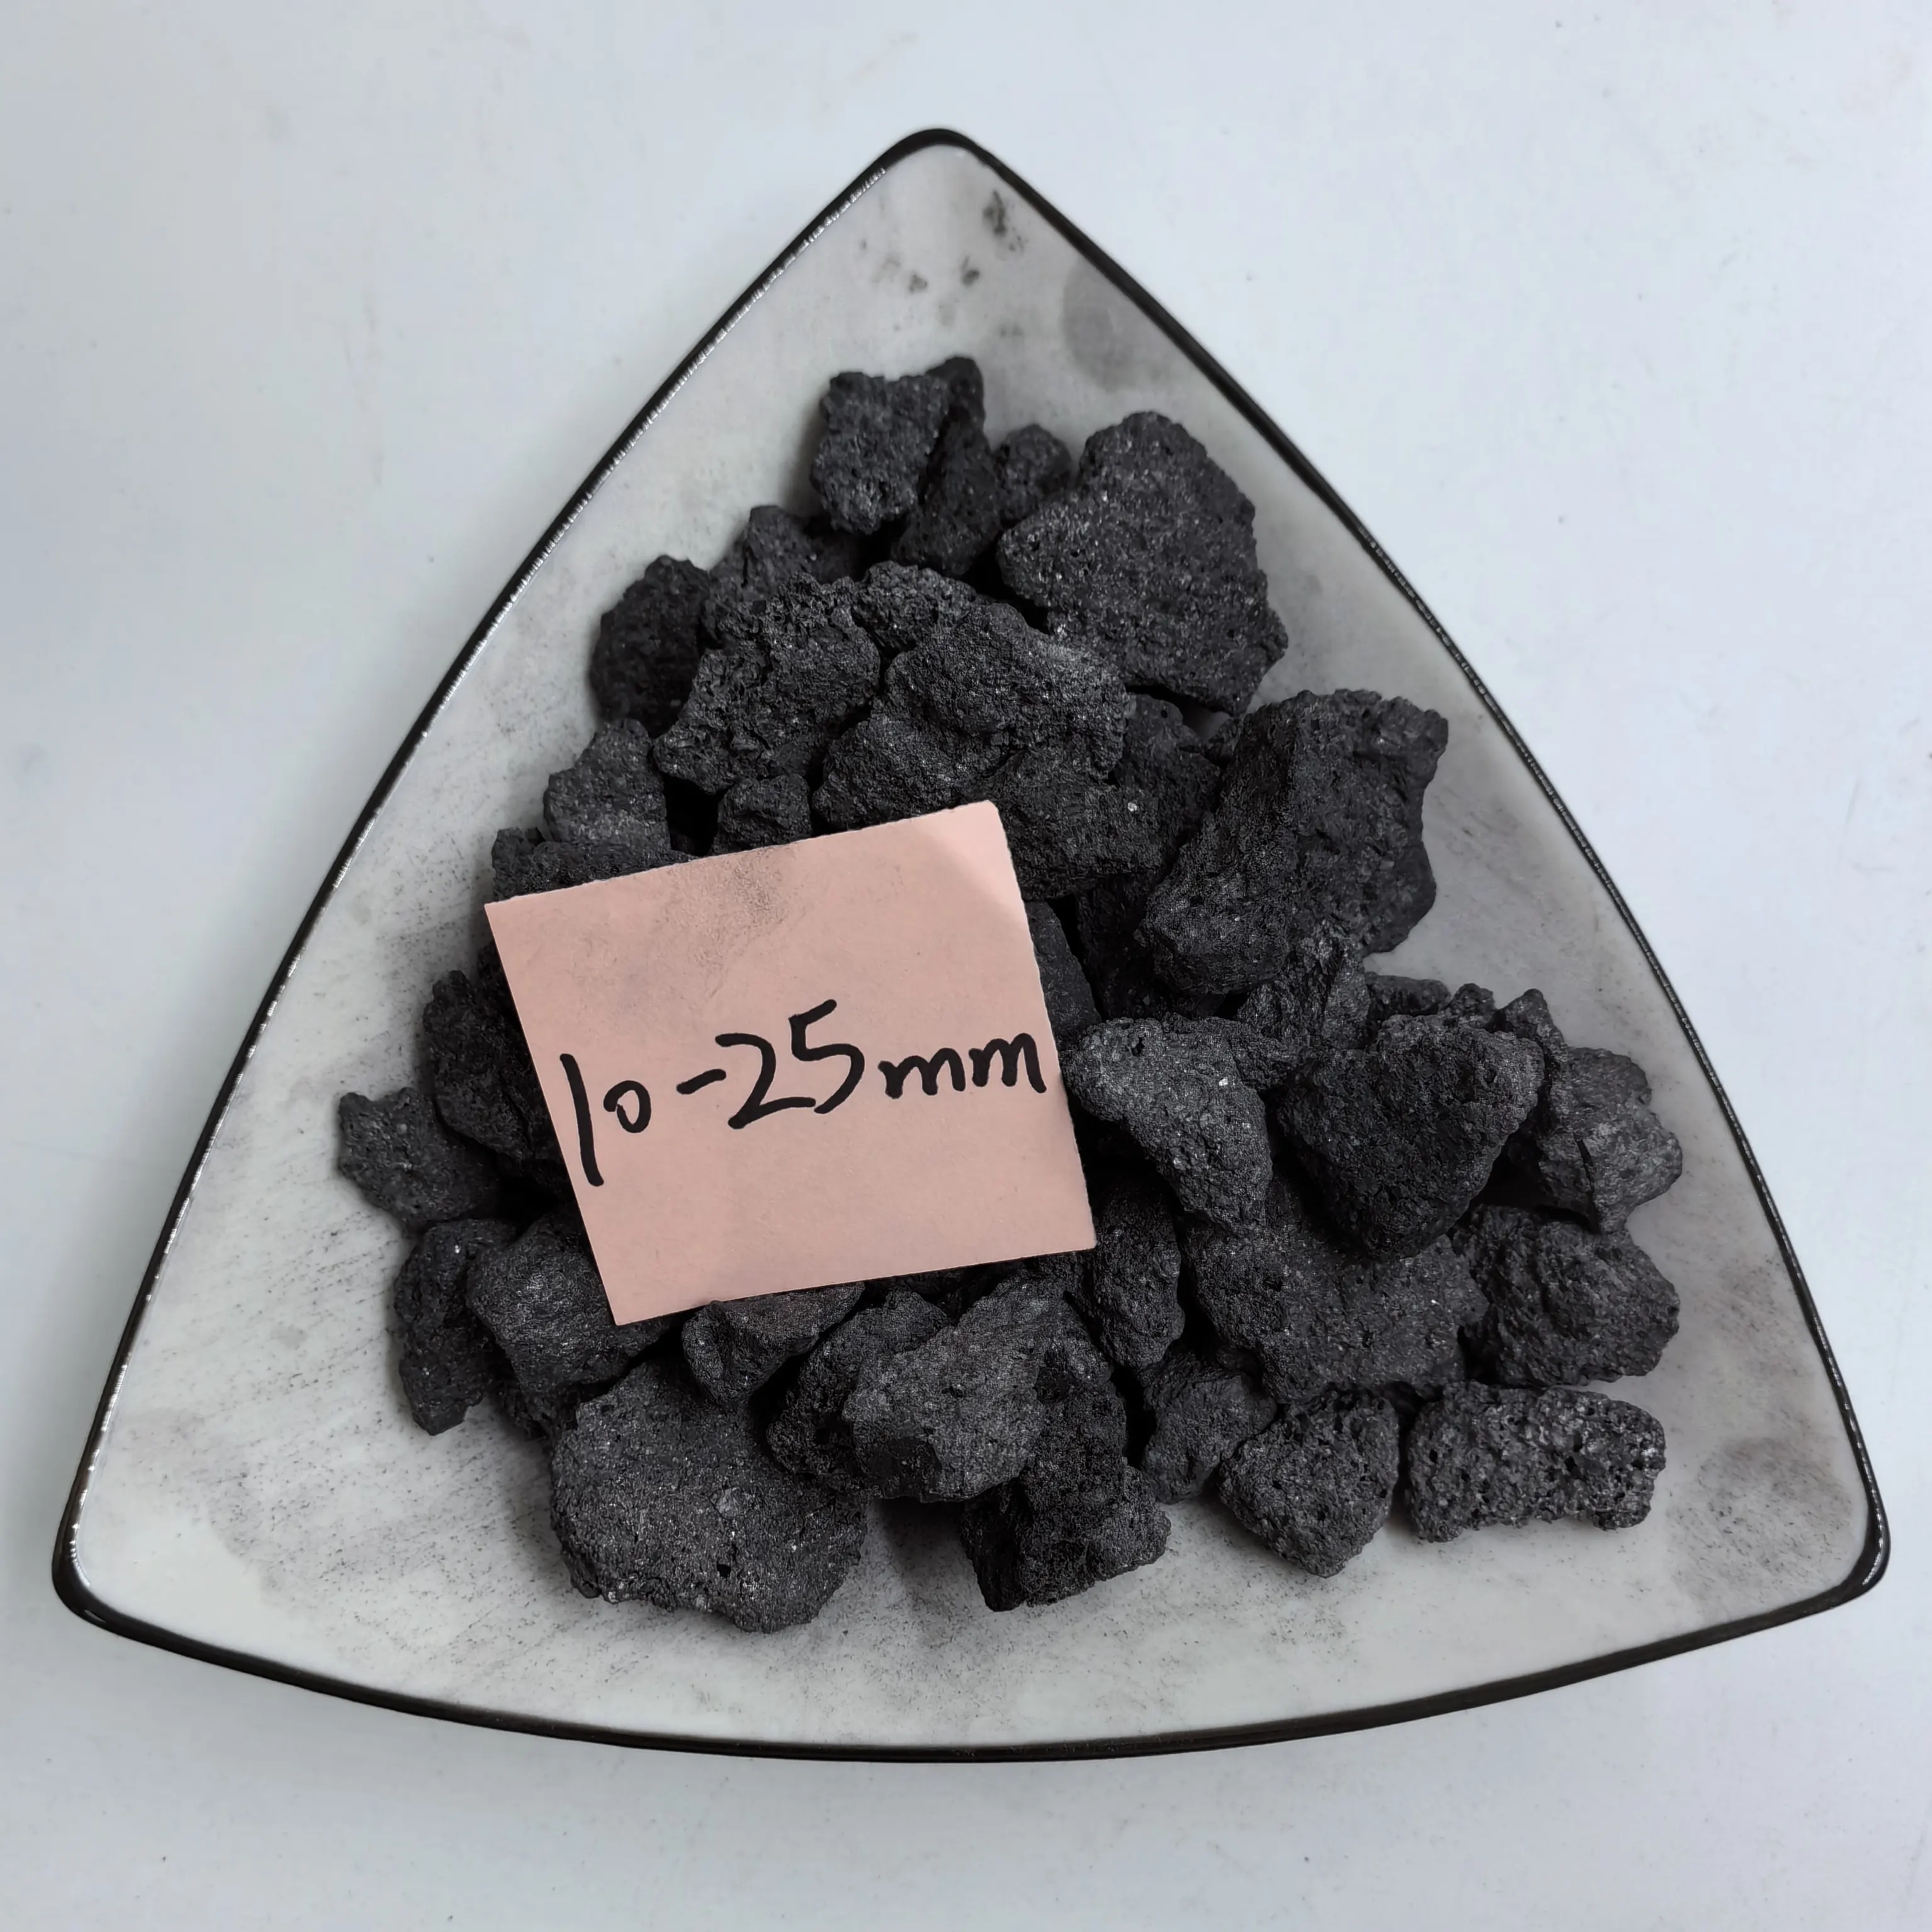 Adequate Supplyperfect The Quality Low-Sulfur Coke From China Metallurgical Coke 10-25mm